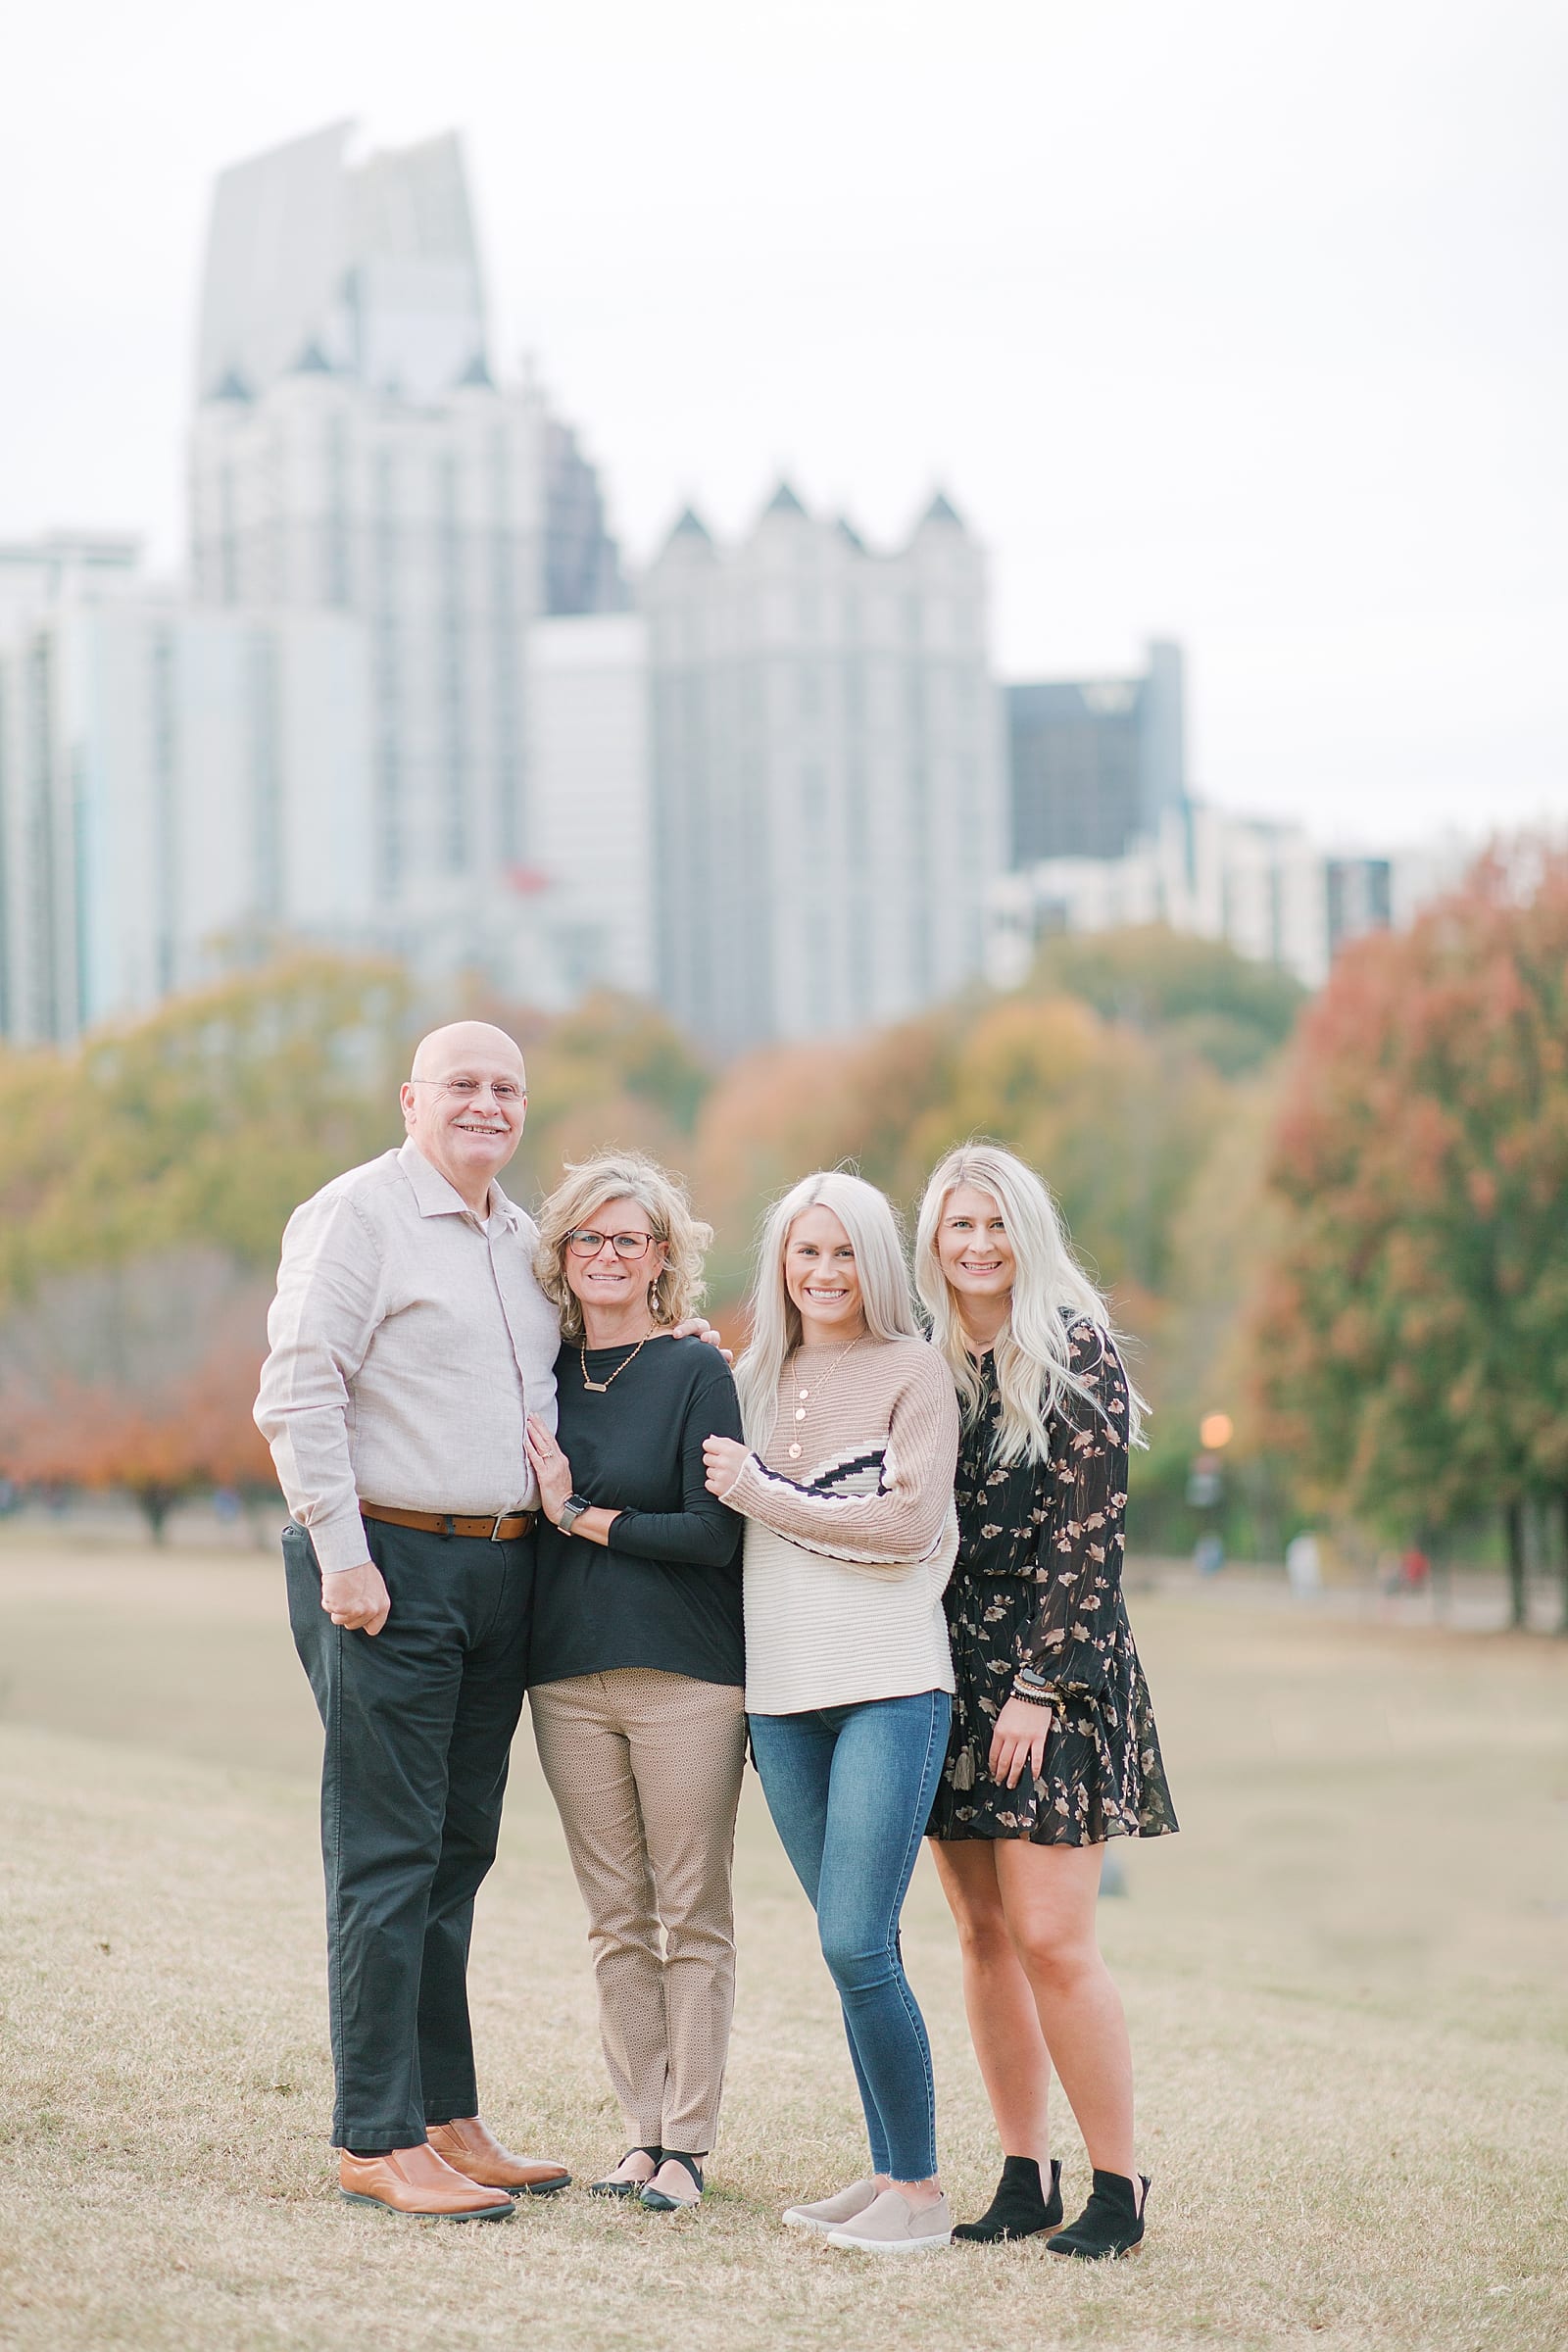 Piedmont Park Atlanta Family with Skyline in the Background Photo